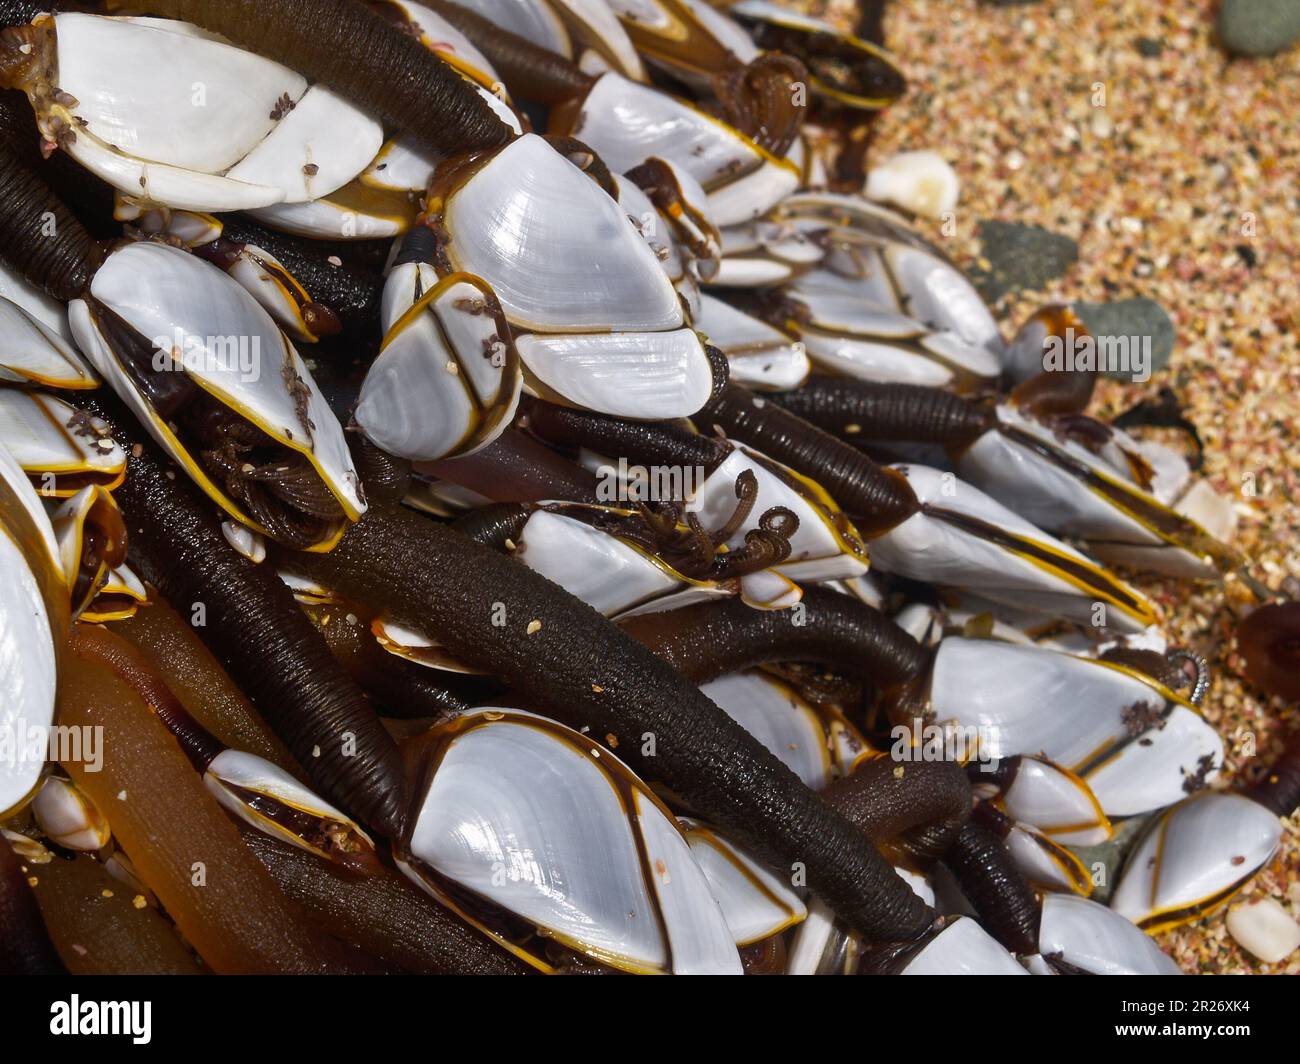 Goose barnacles clustered on piece of oceanic flotsam washed up on beach. Stock Photo